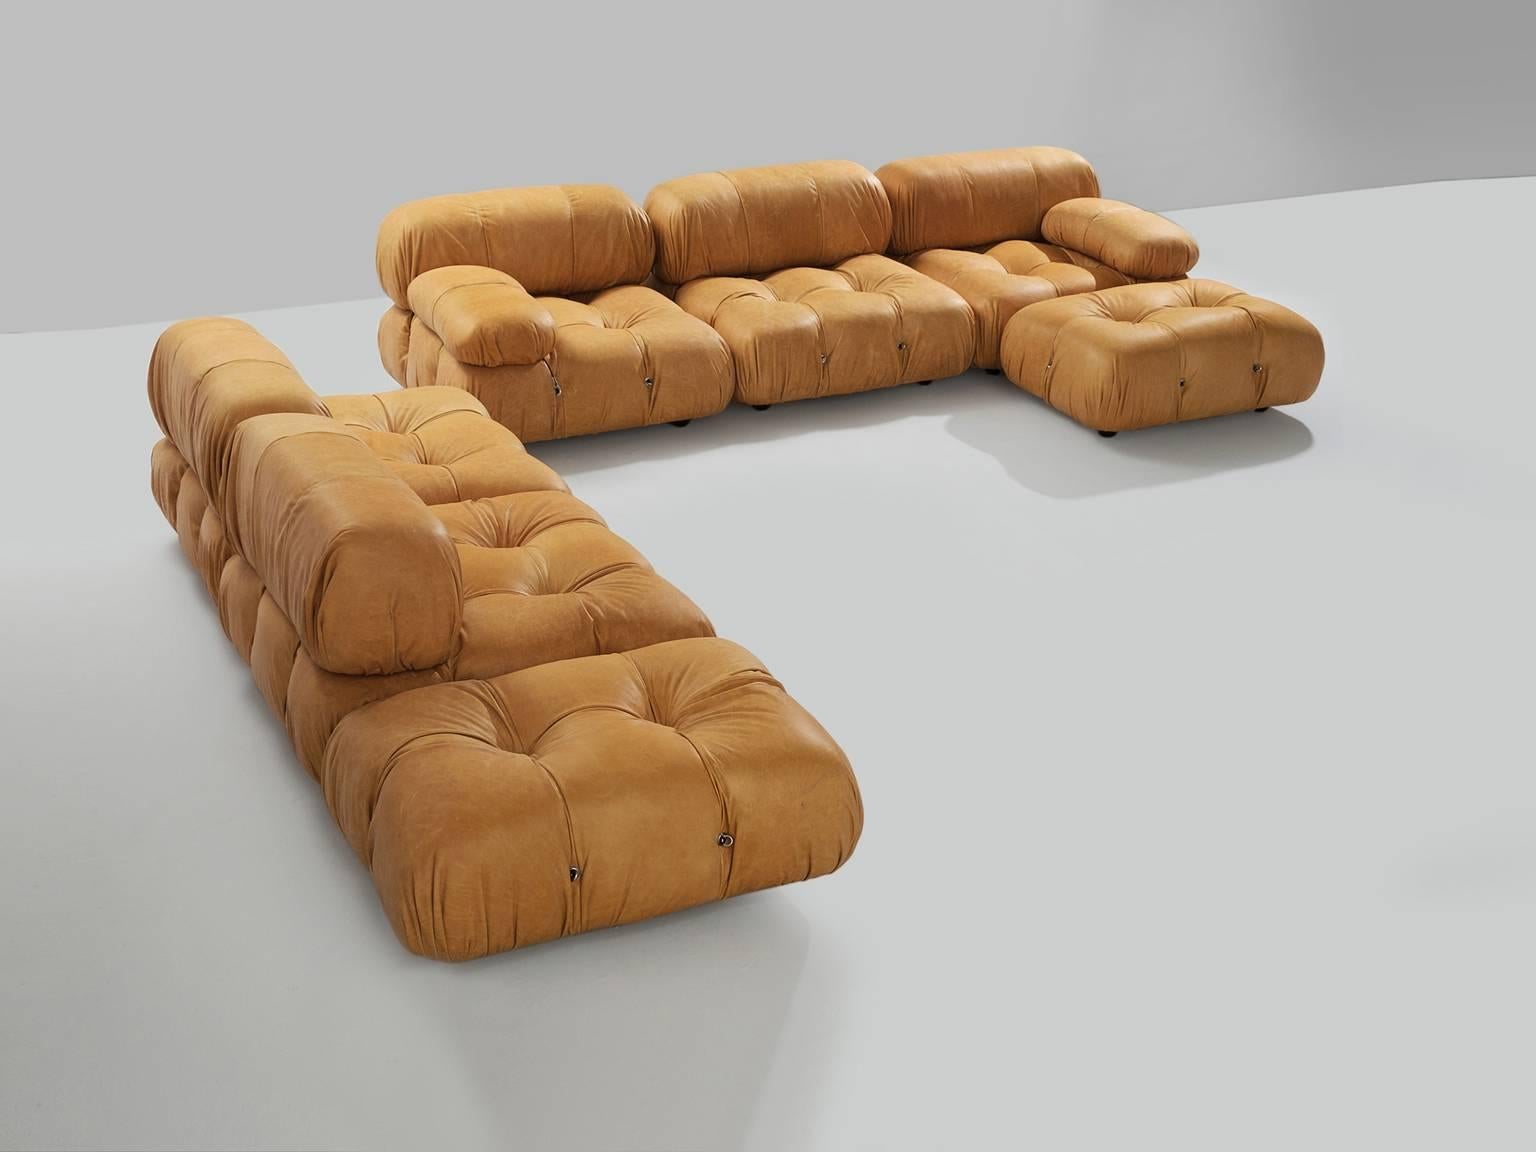 Large modular 'Cameleonda' sofa, in cognac leather upholstery by Mario Bellini for B&B Italia, Italy, 1972.

The sectional elements this sofa was made with can be used freely and apart from one another. The backs and armrests are provided with